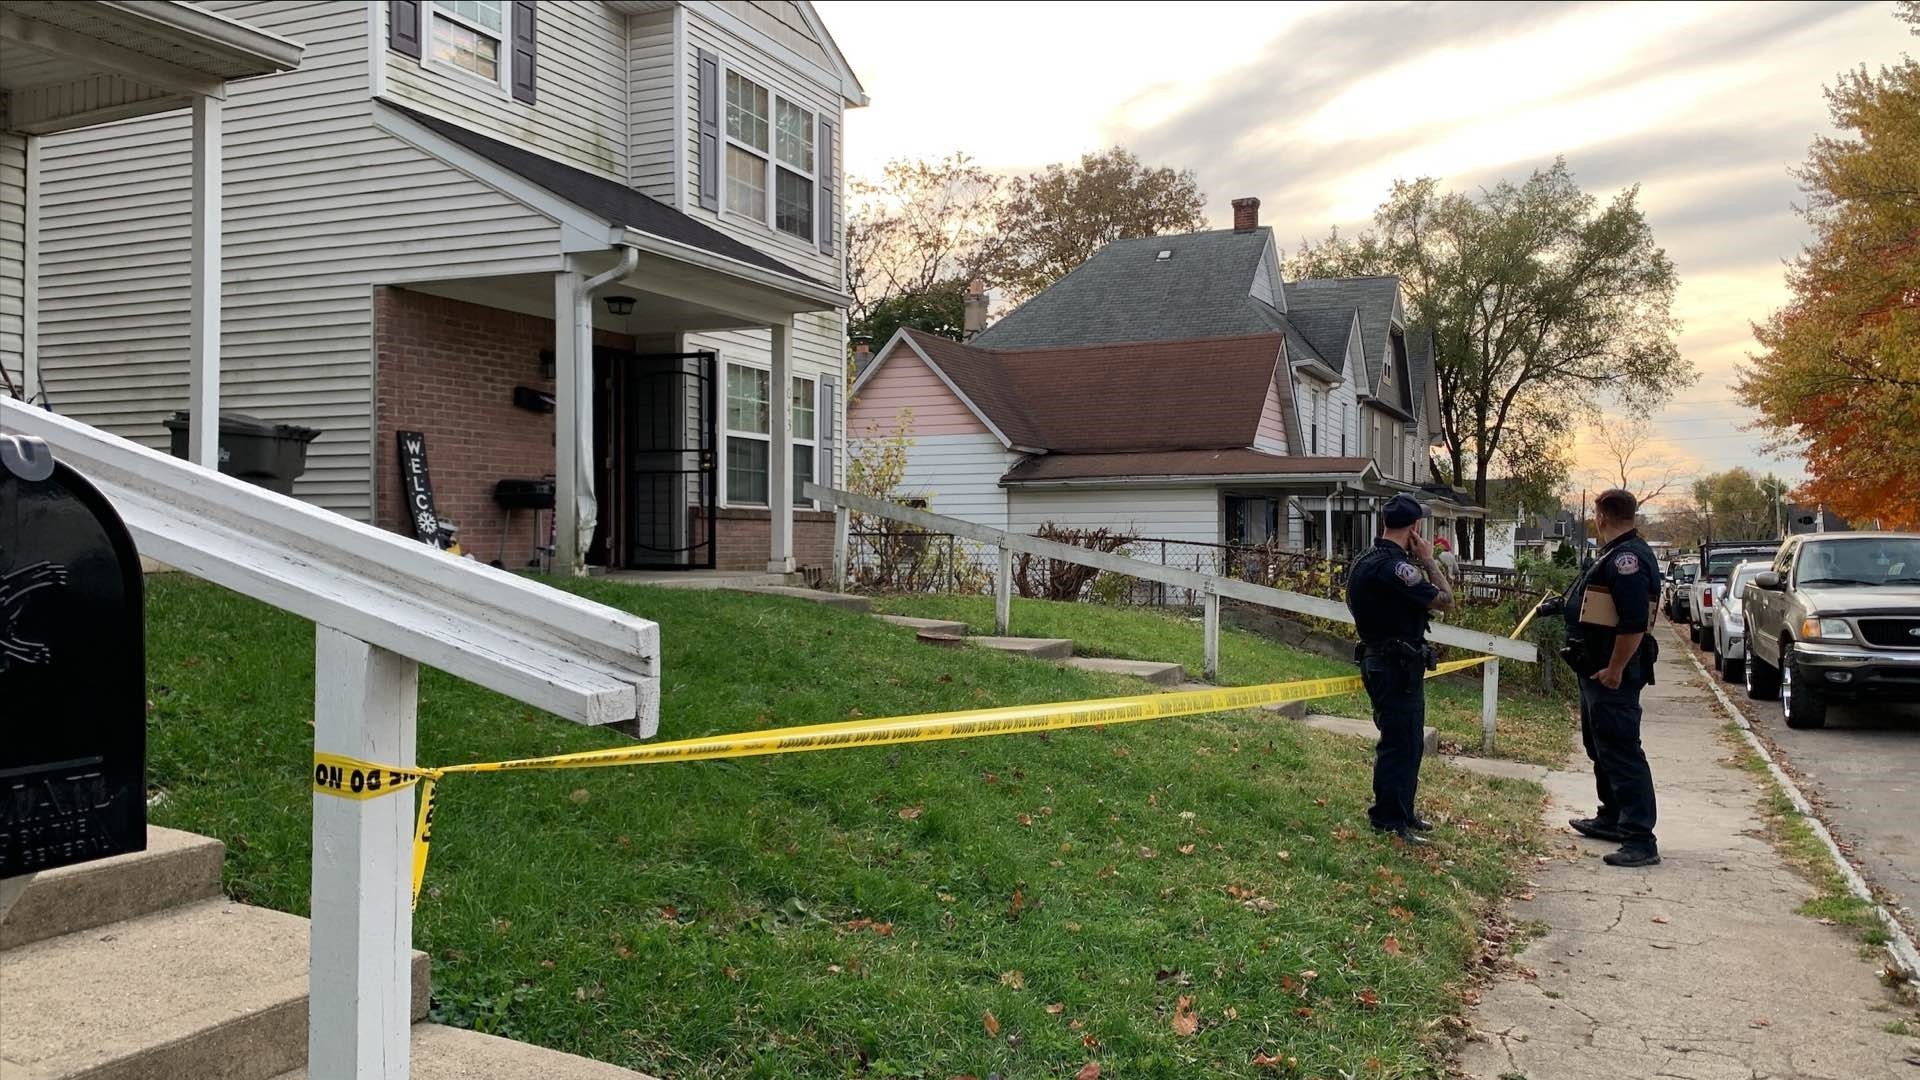 The shooting happened in the 1000 block of Eugene Street, which is located between West 29th and 30th streets and just west of Doctor Martin Luther King Jr. Street.